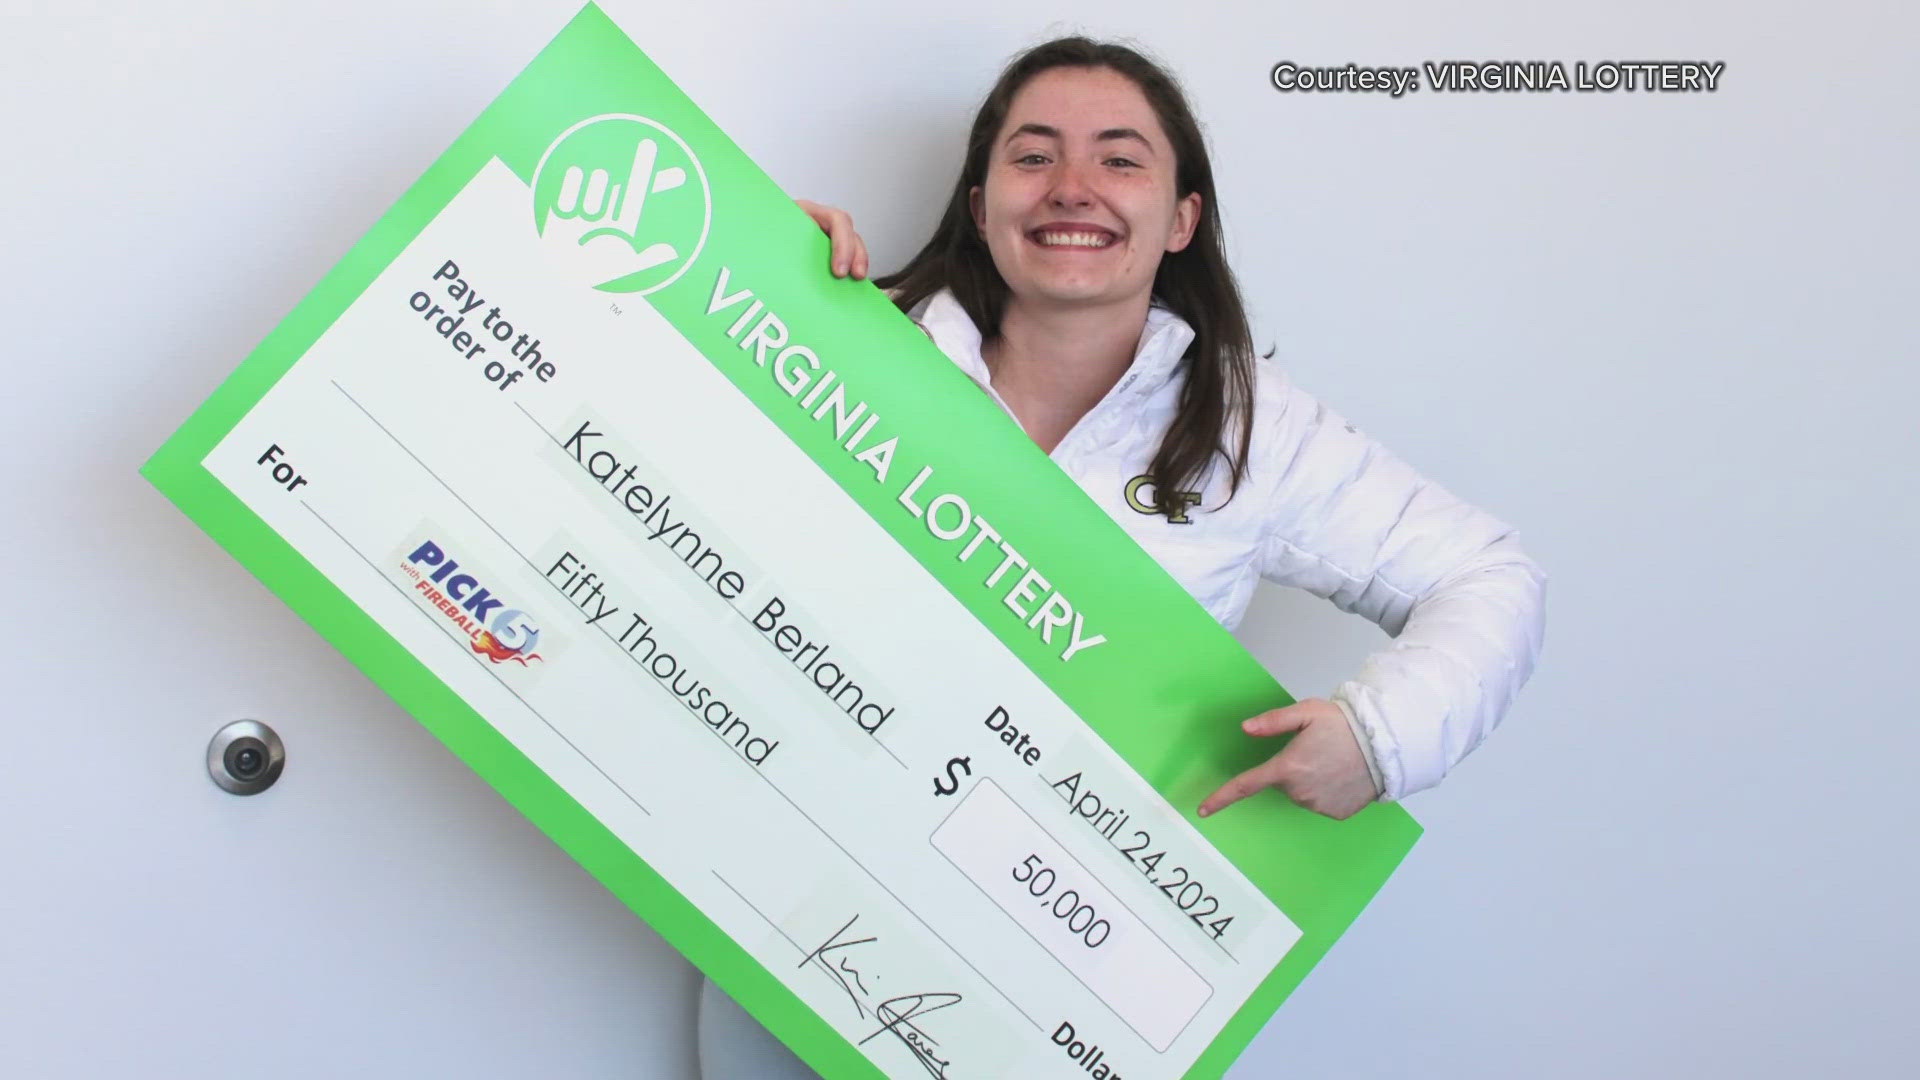 She correctly matched the winning five digit combination and won $50,000 in the April 14th drawing.